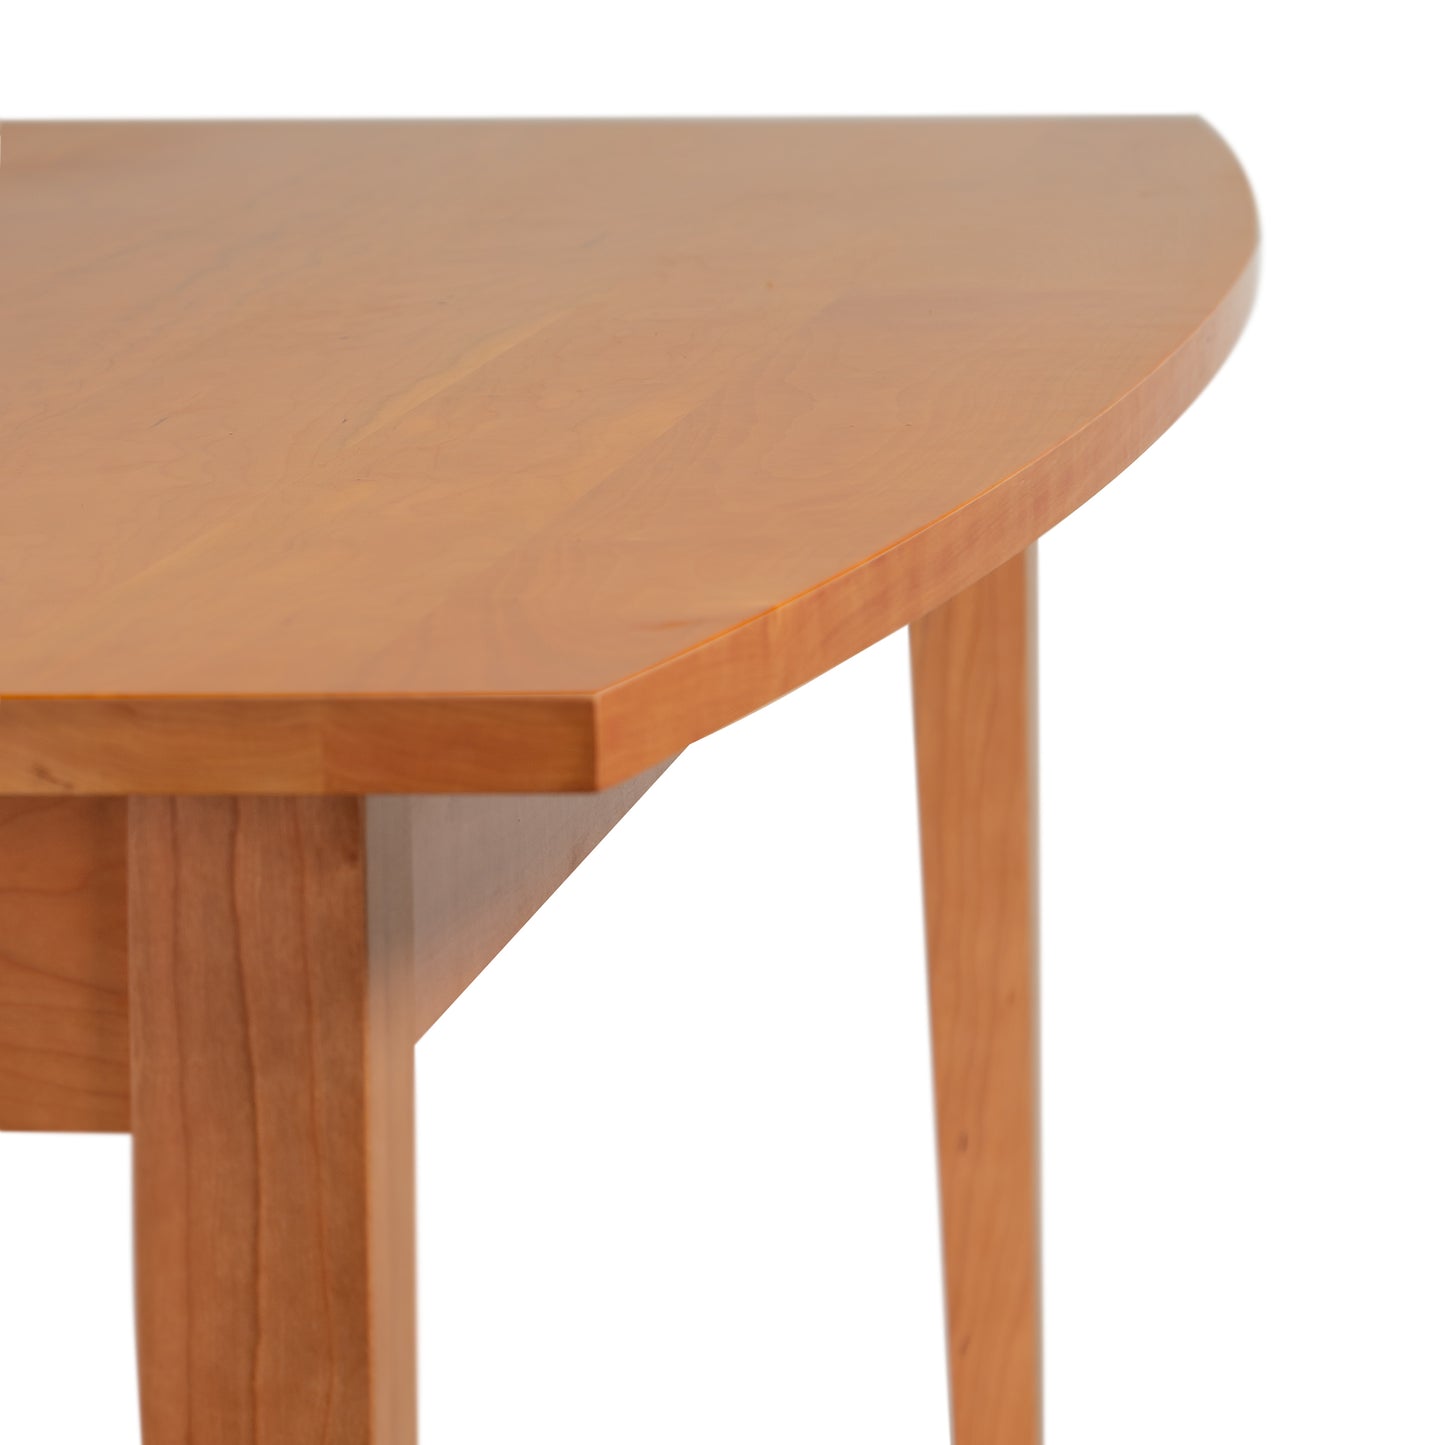 A Classic Shaker Solid Boat Top Table by Lyndon Furniture hardwood dining table with a curved top.